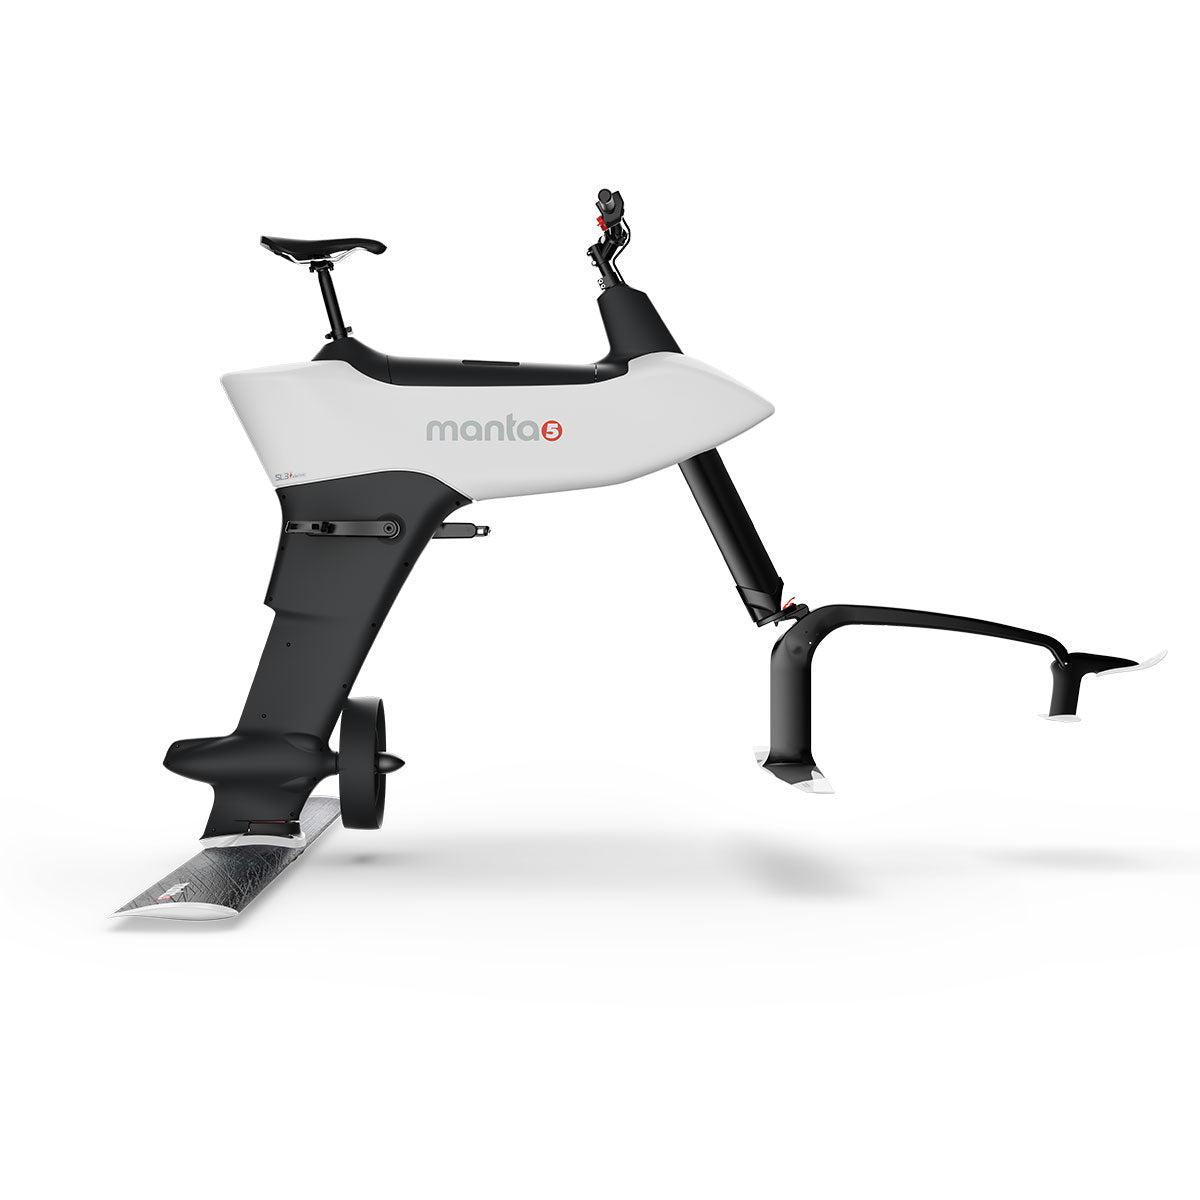 Manta5 SL3+ Electric Hydrofoil Efoil Ebike White for sale at Session Sports